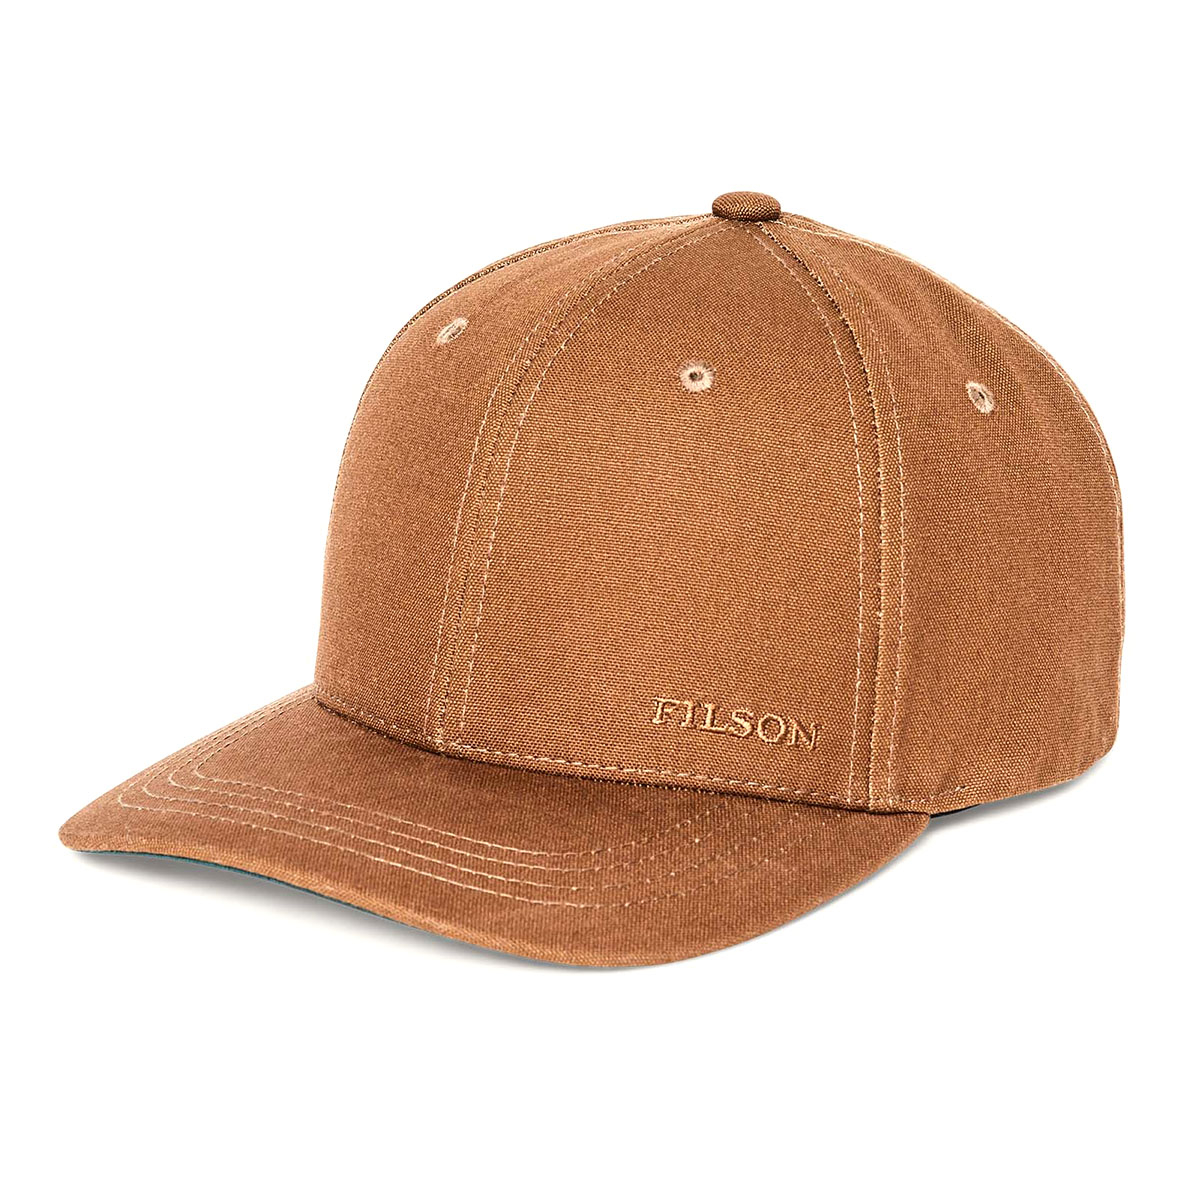 Filson Dry Tin Logger Cap Whiskey, a classic trucker-style cap made with sturdy canvas Tin Cloth